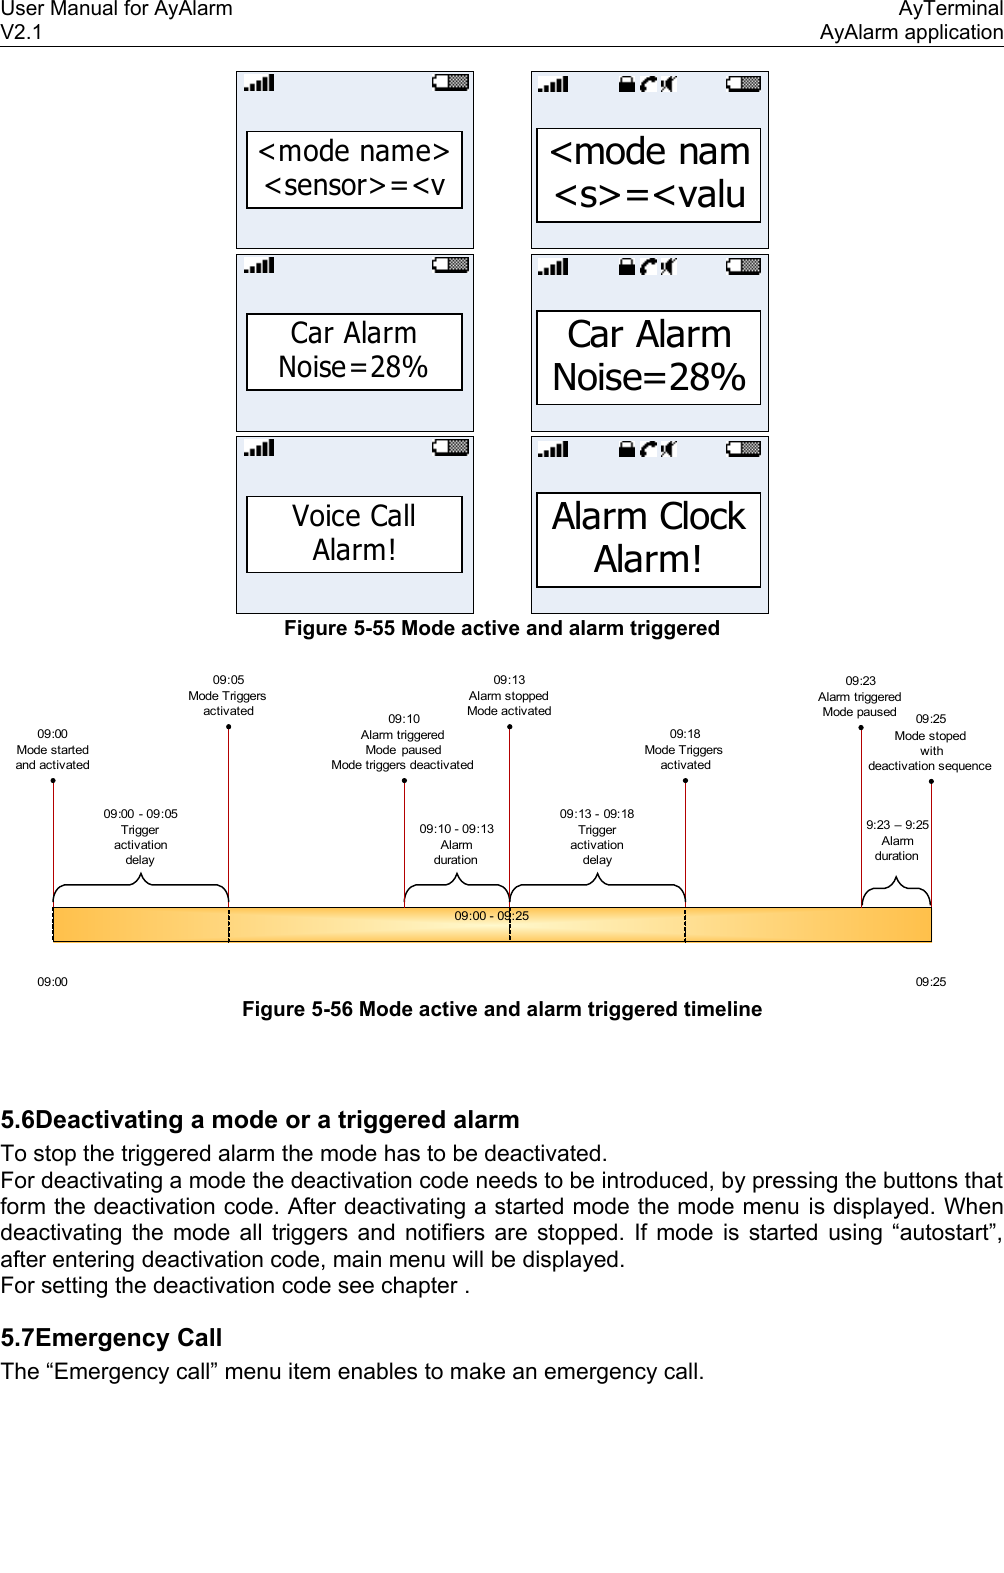 User Manual for AyAlarm AyTerminalV2.1 AyAlarm application&lt;mode name&gt; &lt;sensor&gt;=&lt;v&lt;mode nam &lt;s&gt;=&lt;valuCar Alarm Noise=28%Car Alarm Noise=28%Voice Call Alarm!Alarm Clock Alarm!Figure 5-55 Mode active and alarm triggered09:00 09:2509:05Mode Triggersactivated09:00Mode startedand activated09:25Mode stopedwithdeactivation sequence09:10 - 09:13Alarmduration09:13Alarm stoppedMode activated09:18Mode Triggersactivated09:00 - 09:2509:10Alarm triggeredMode  pausedMode triggers deactivated09:13 - 09:18Triggeractivationdelay09:23Alarm triggeredMode paused09:00 - 09:05TriggeractivationdelayAlarmduration9:23 – 9:25Figure 5-56 Mode active and alarm triggered timeline5.6Deactivating a mode or a triggered alarmTo stop the triggered alarm the mode has to be deactivated.For deactivating a mode the deactivation code needs to be introduced, by pressing the buttons that form the deactivation code. After deactivating a started mode the mode menu is displayed. When deactivating the mode all triggers and notifiers are stopped. If mode is started using “autostart”, after entering deactivation code, main menu will be displayed.For setting the deactivation code see chapter . 5.7Emergency CallThe “Emergency call” menu item enables to make an emergency call.